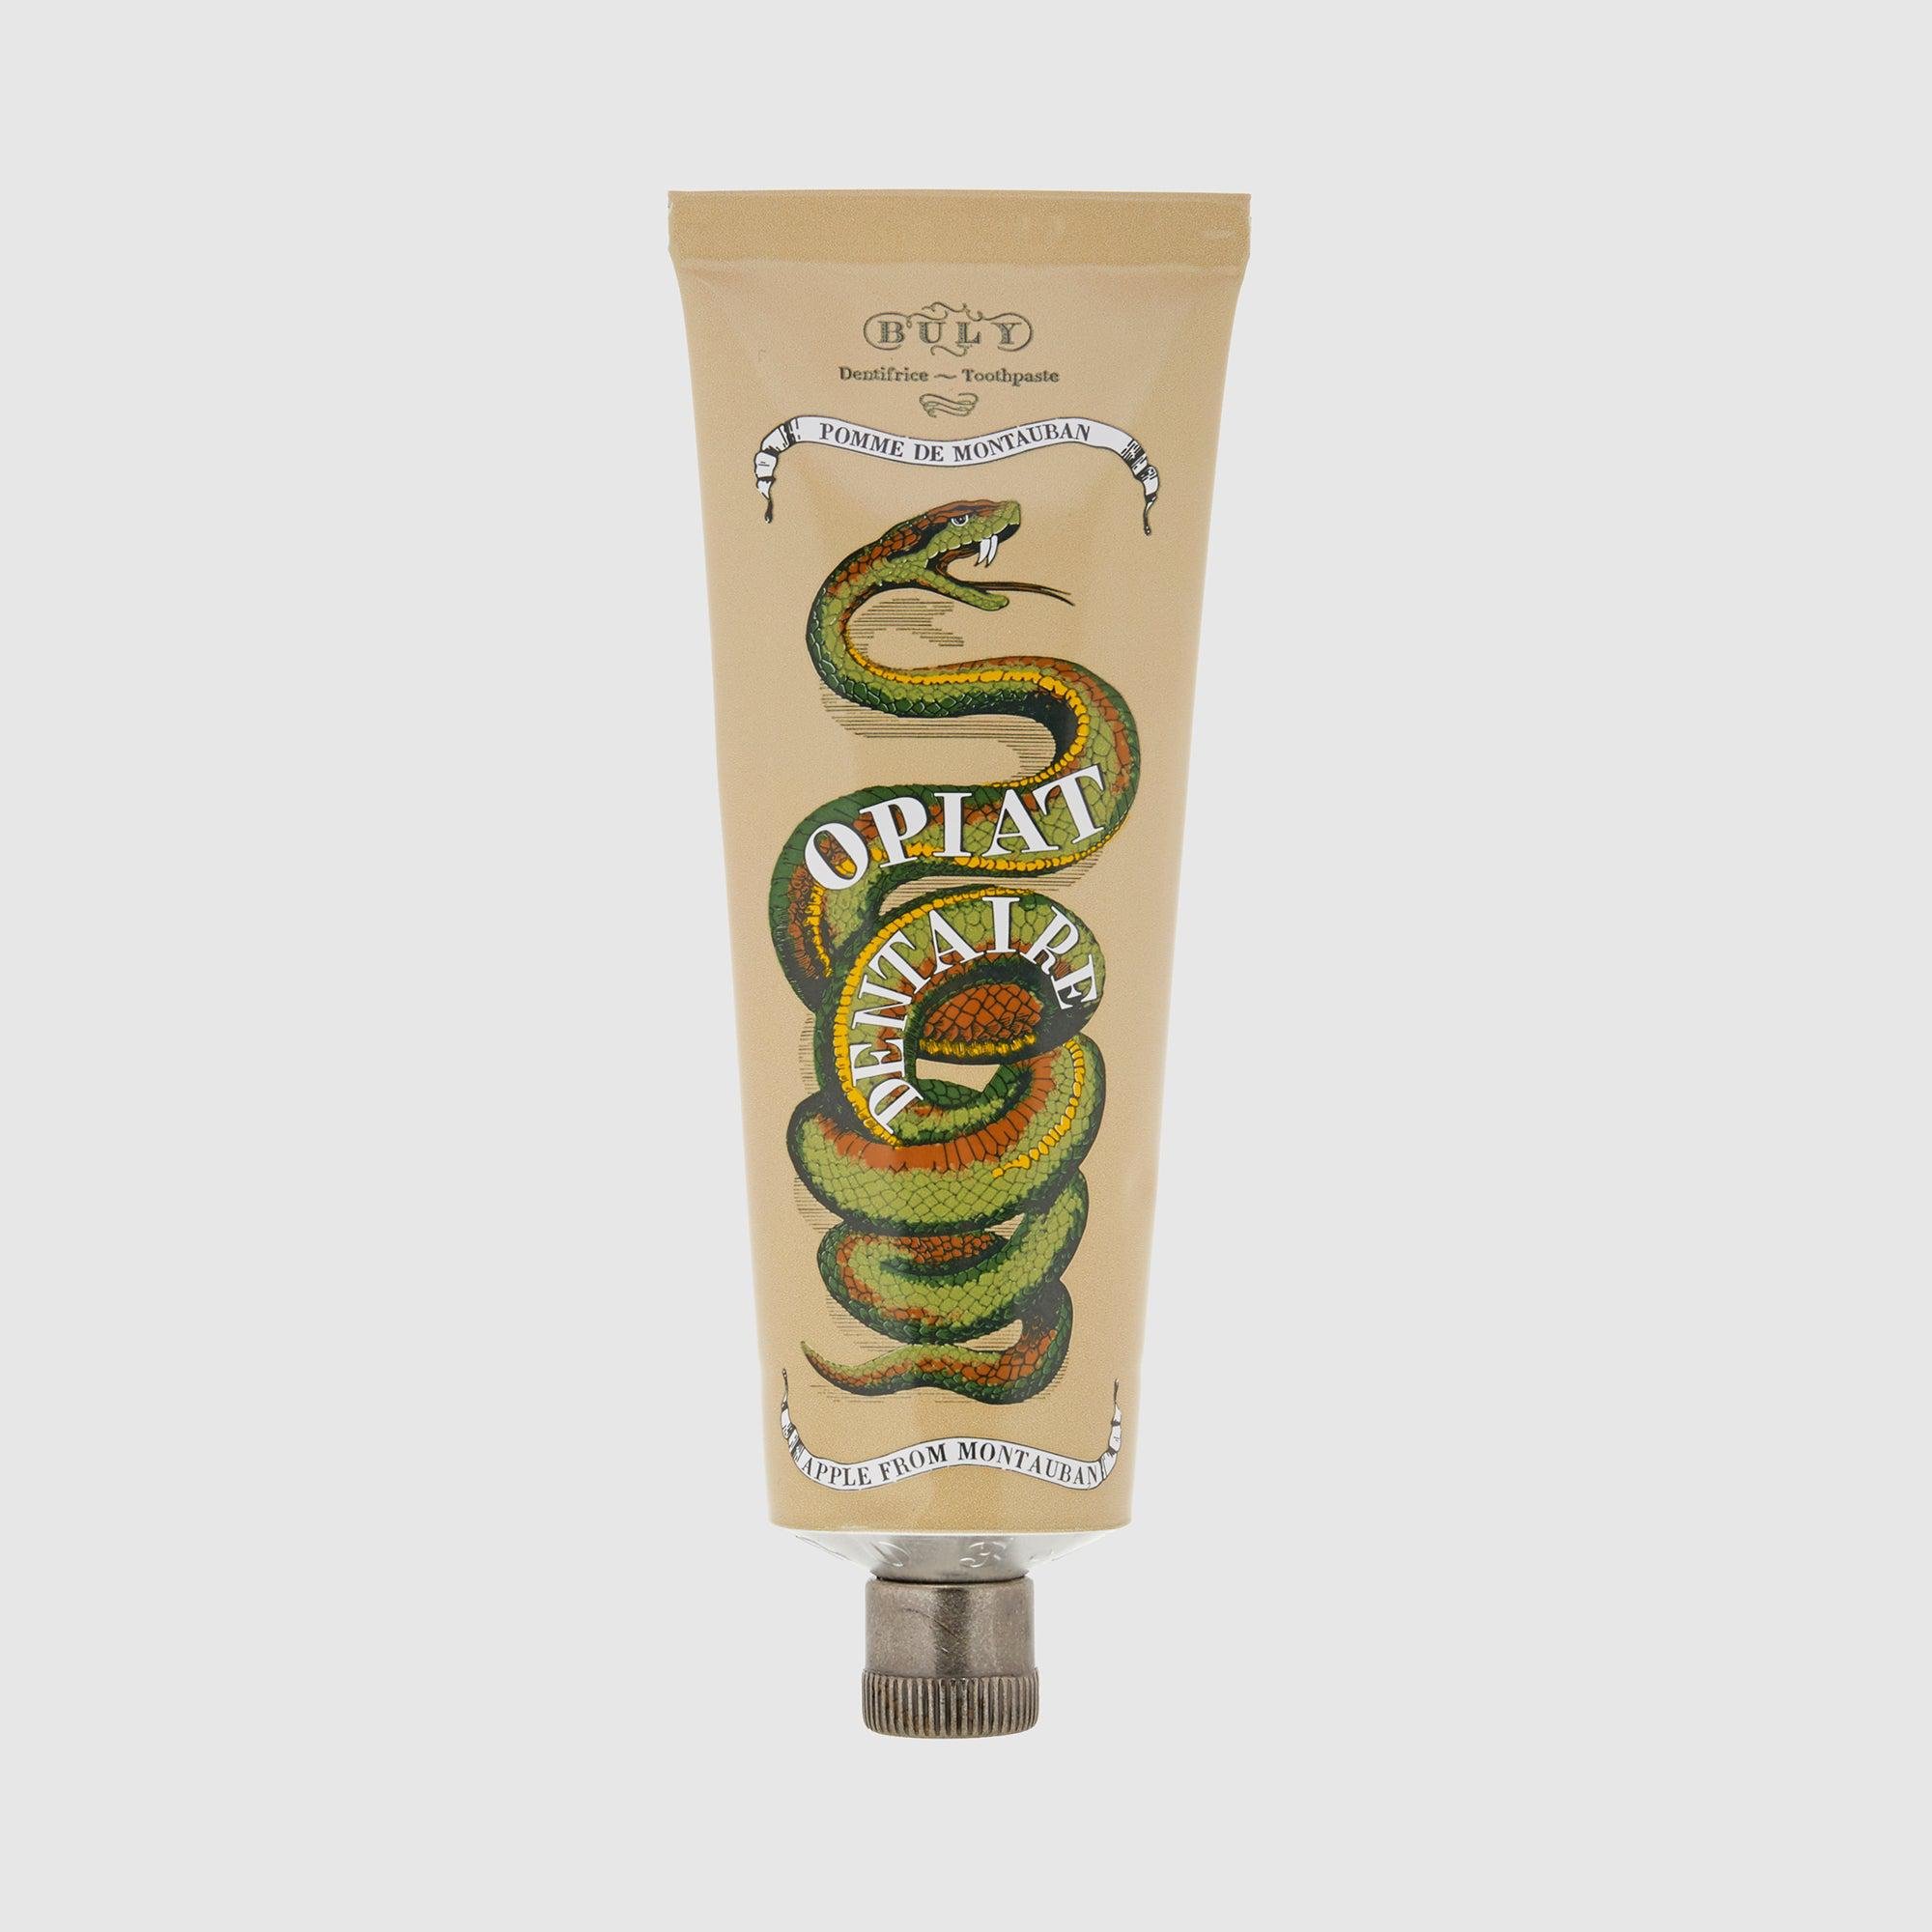 Buly 1803 Opiat Dentaire Apple of Montauban Toothpaste, 75ml by BULY 1803